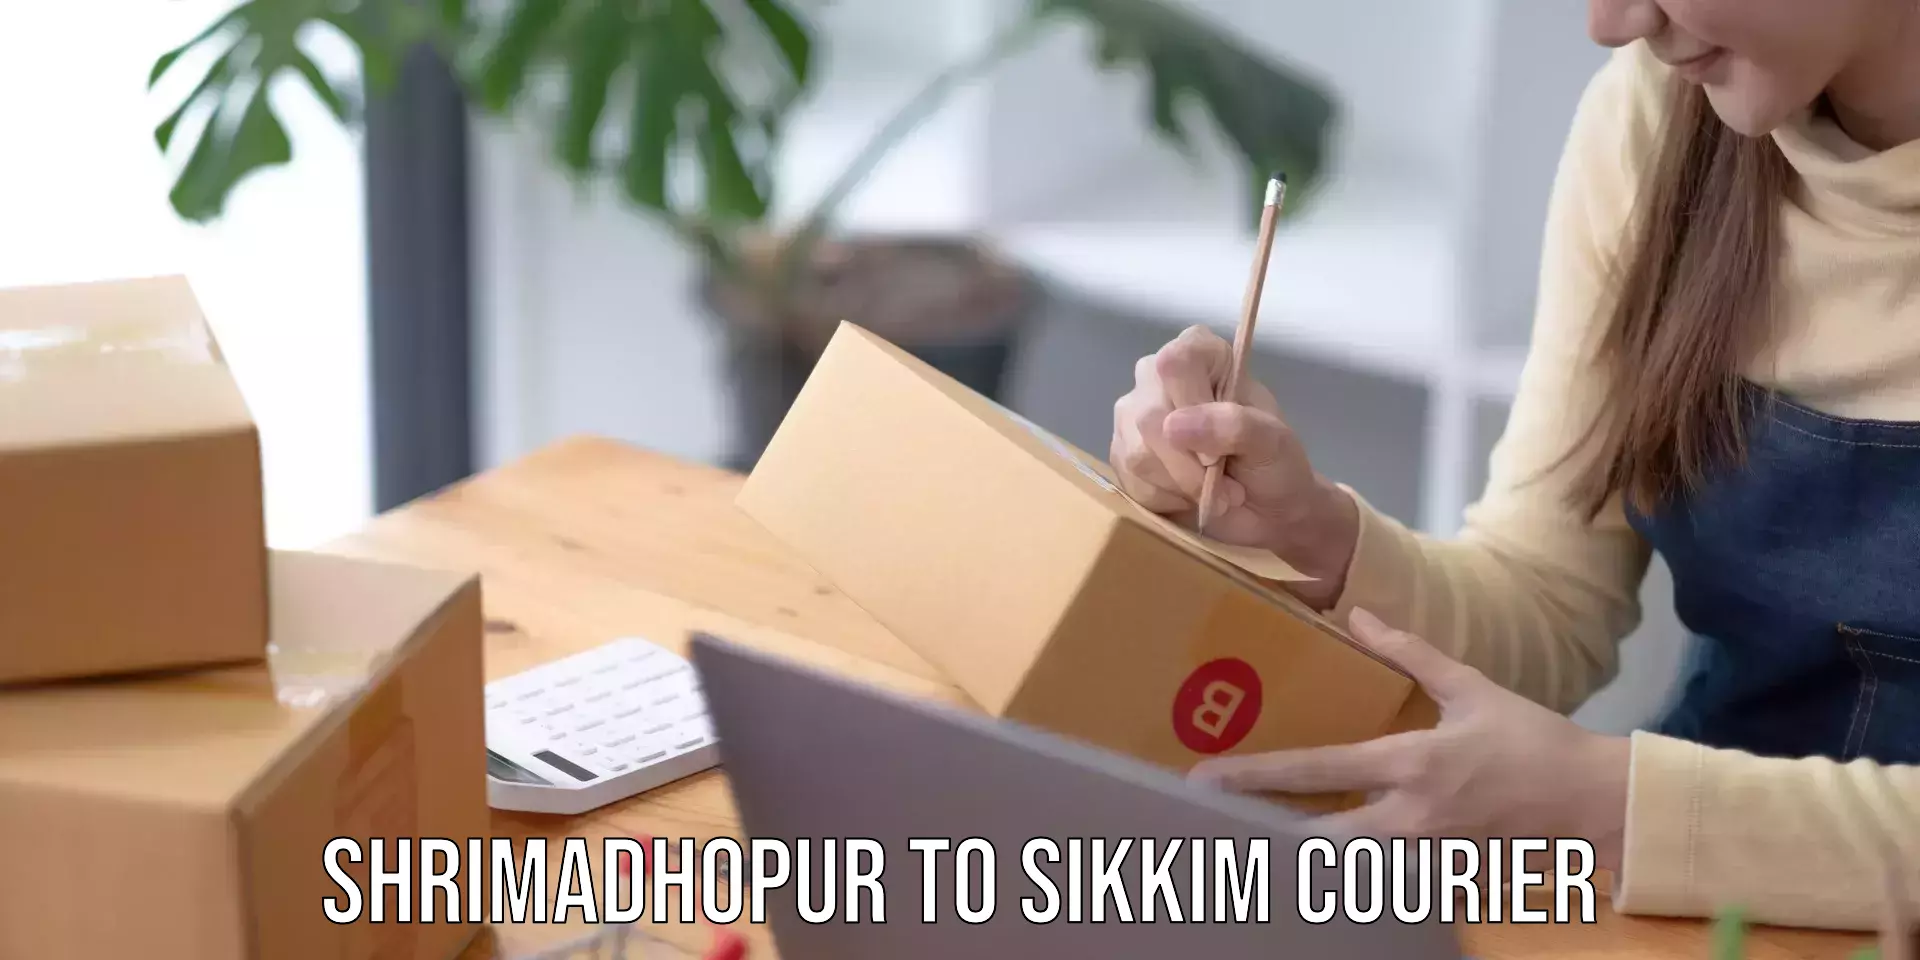 User-friendly delivery service Shrimadhopur to Sikkim